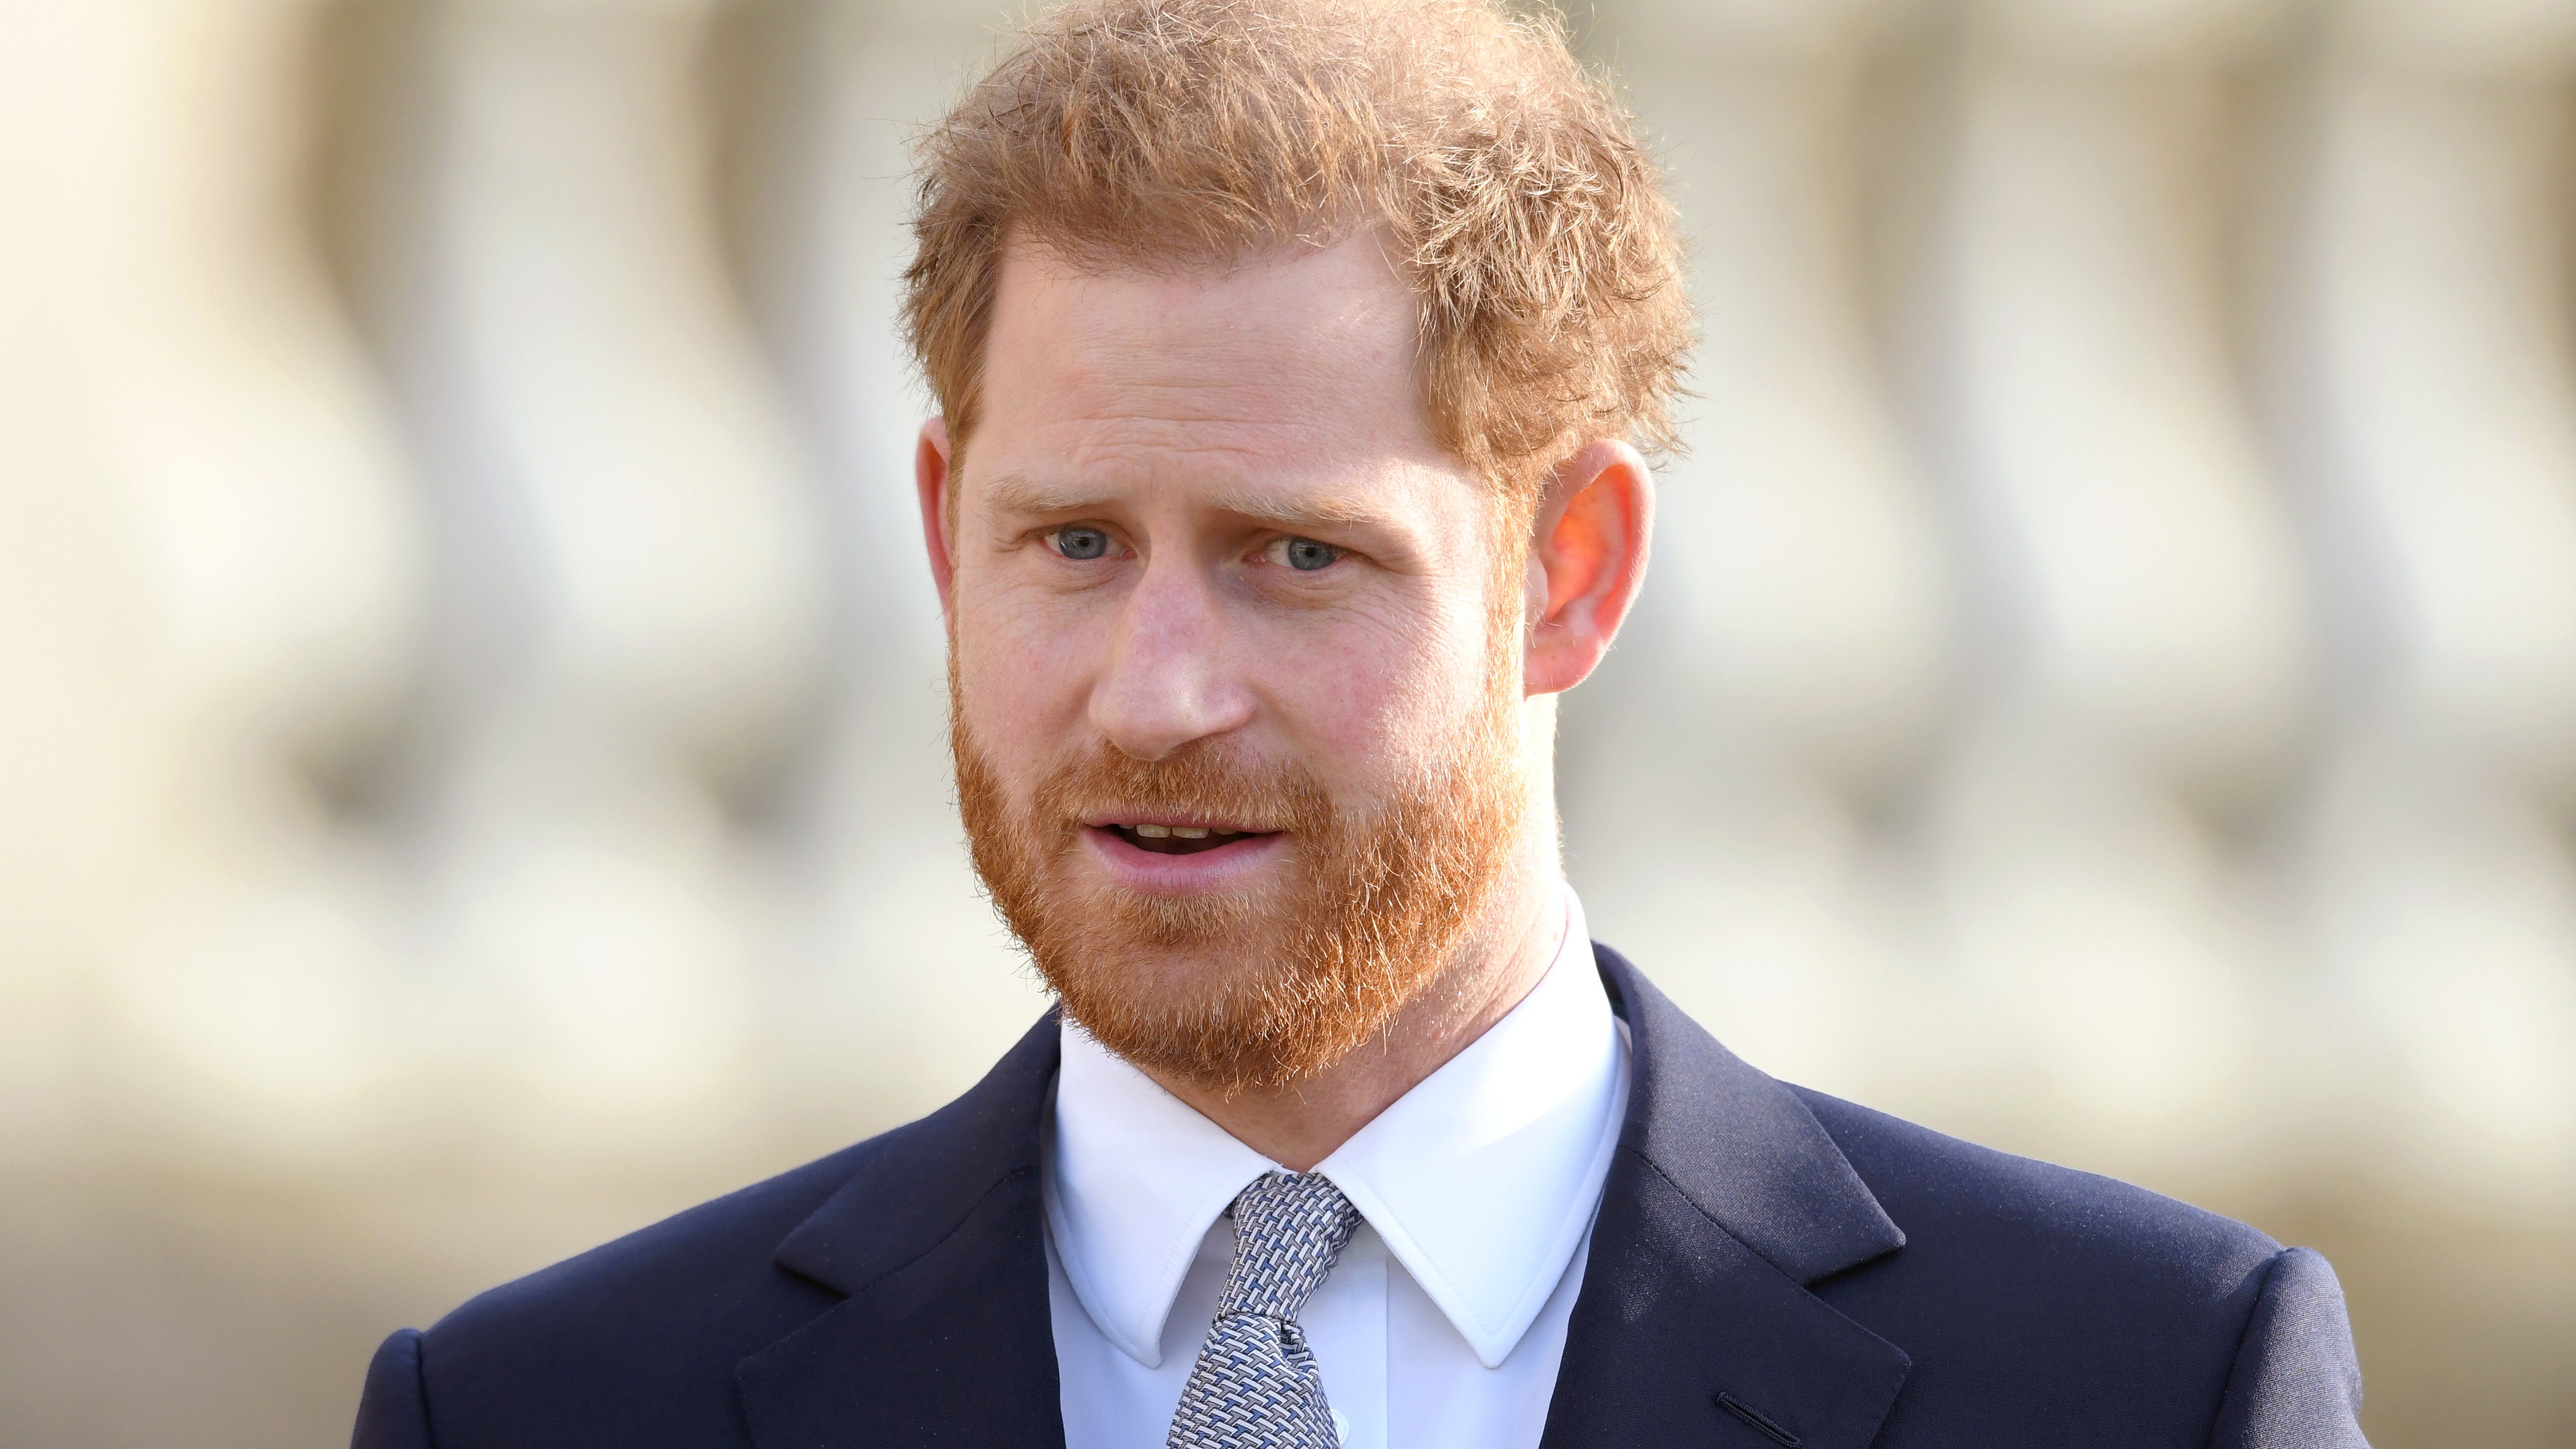 Prince Harry, UK tabloid comes to defamation agreement over the Royal Navy’s false claim